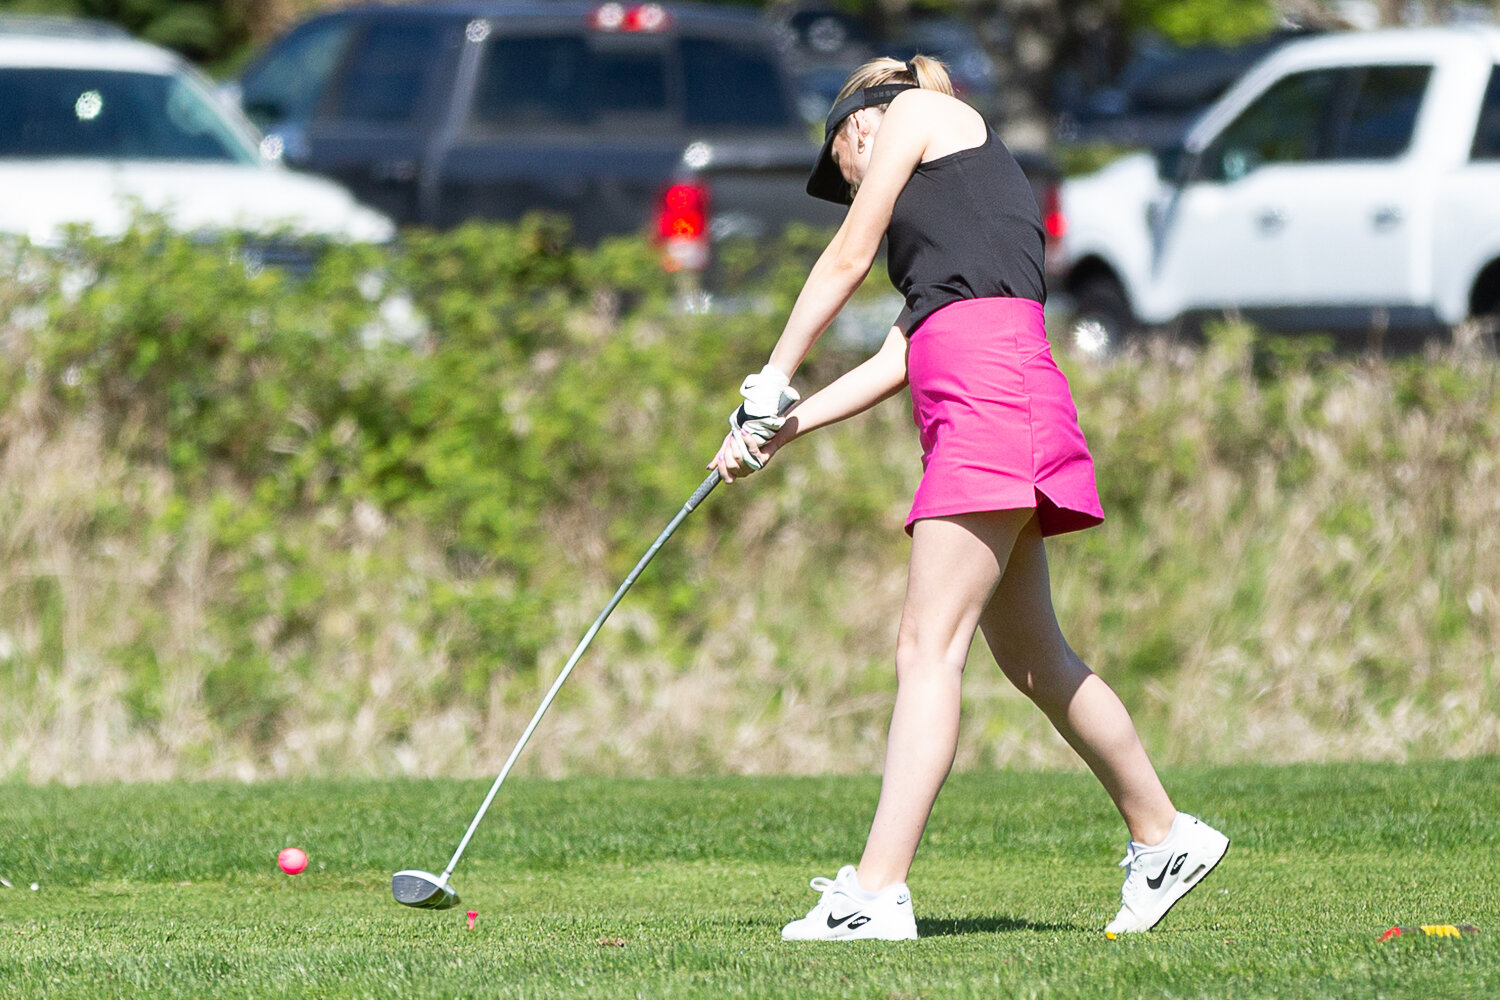 Rochester's Audrey Williams takes her first swing on hole one at Tumwater Valley Golf Course of the 2A EvCo Championships May 9.